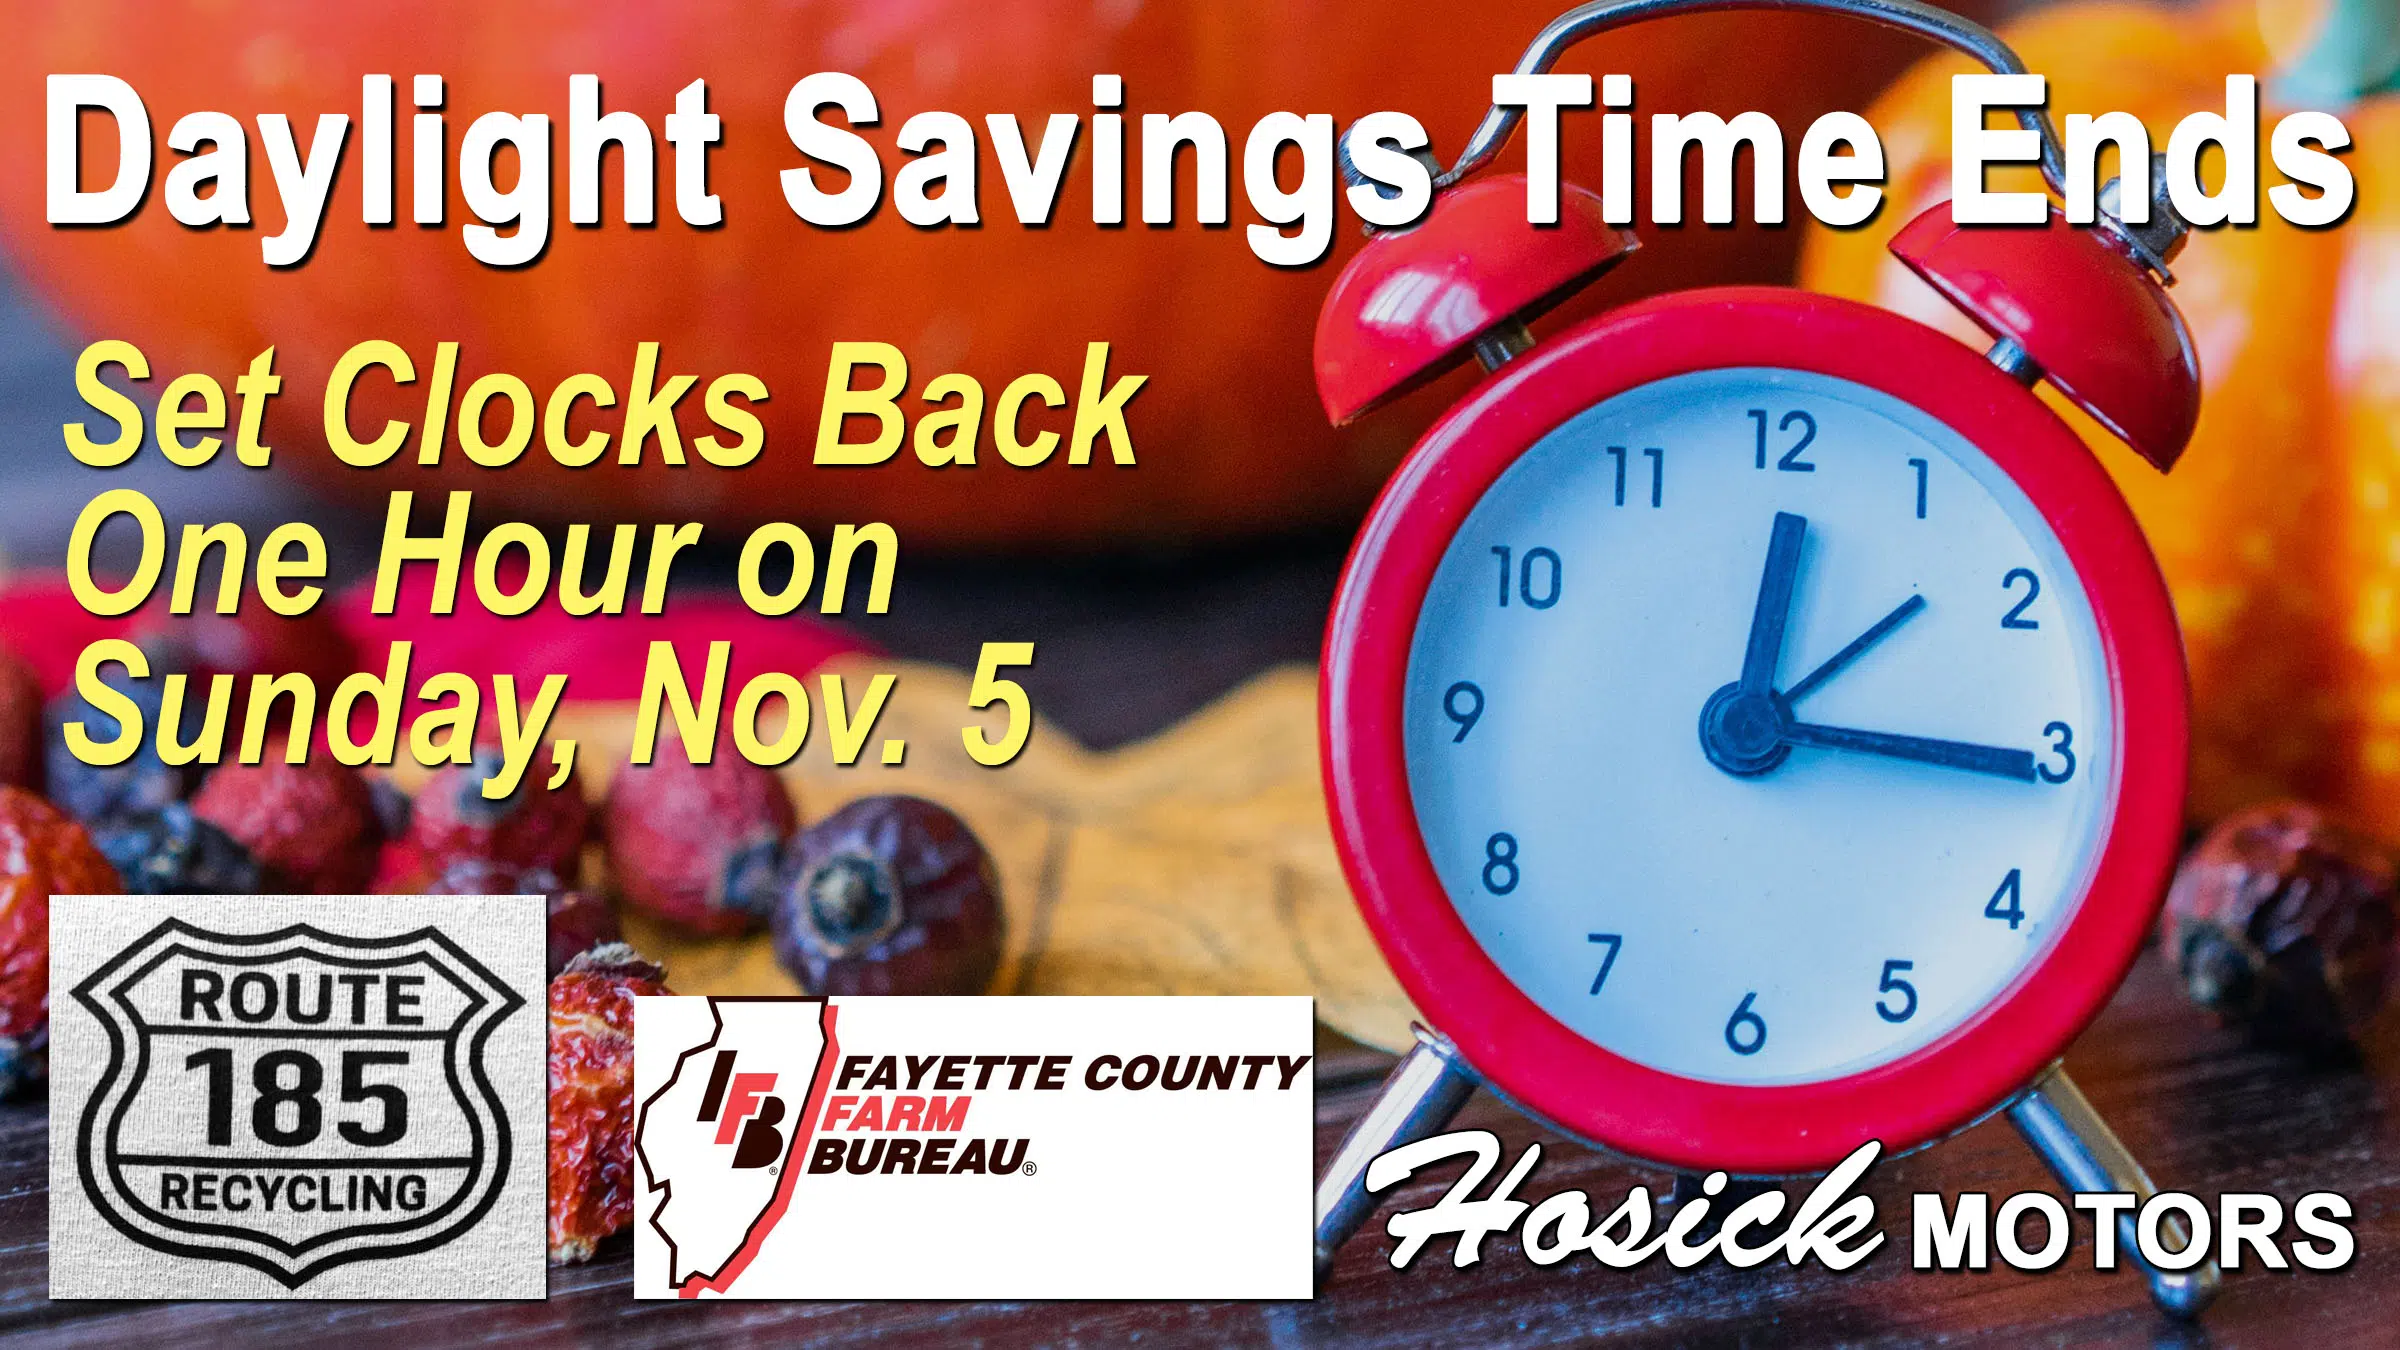 Daylight Saving Time end this weekend